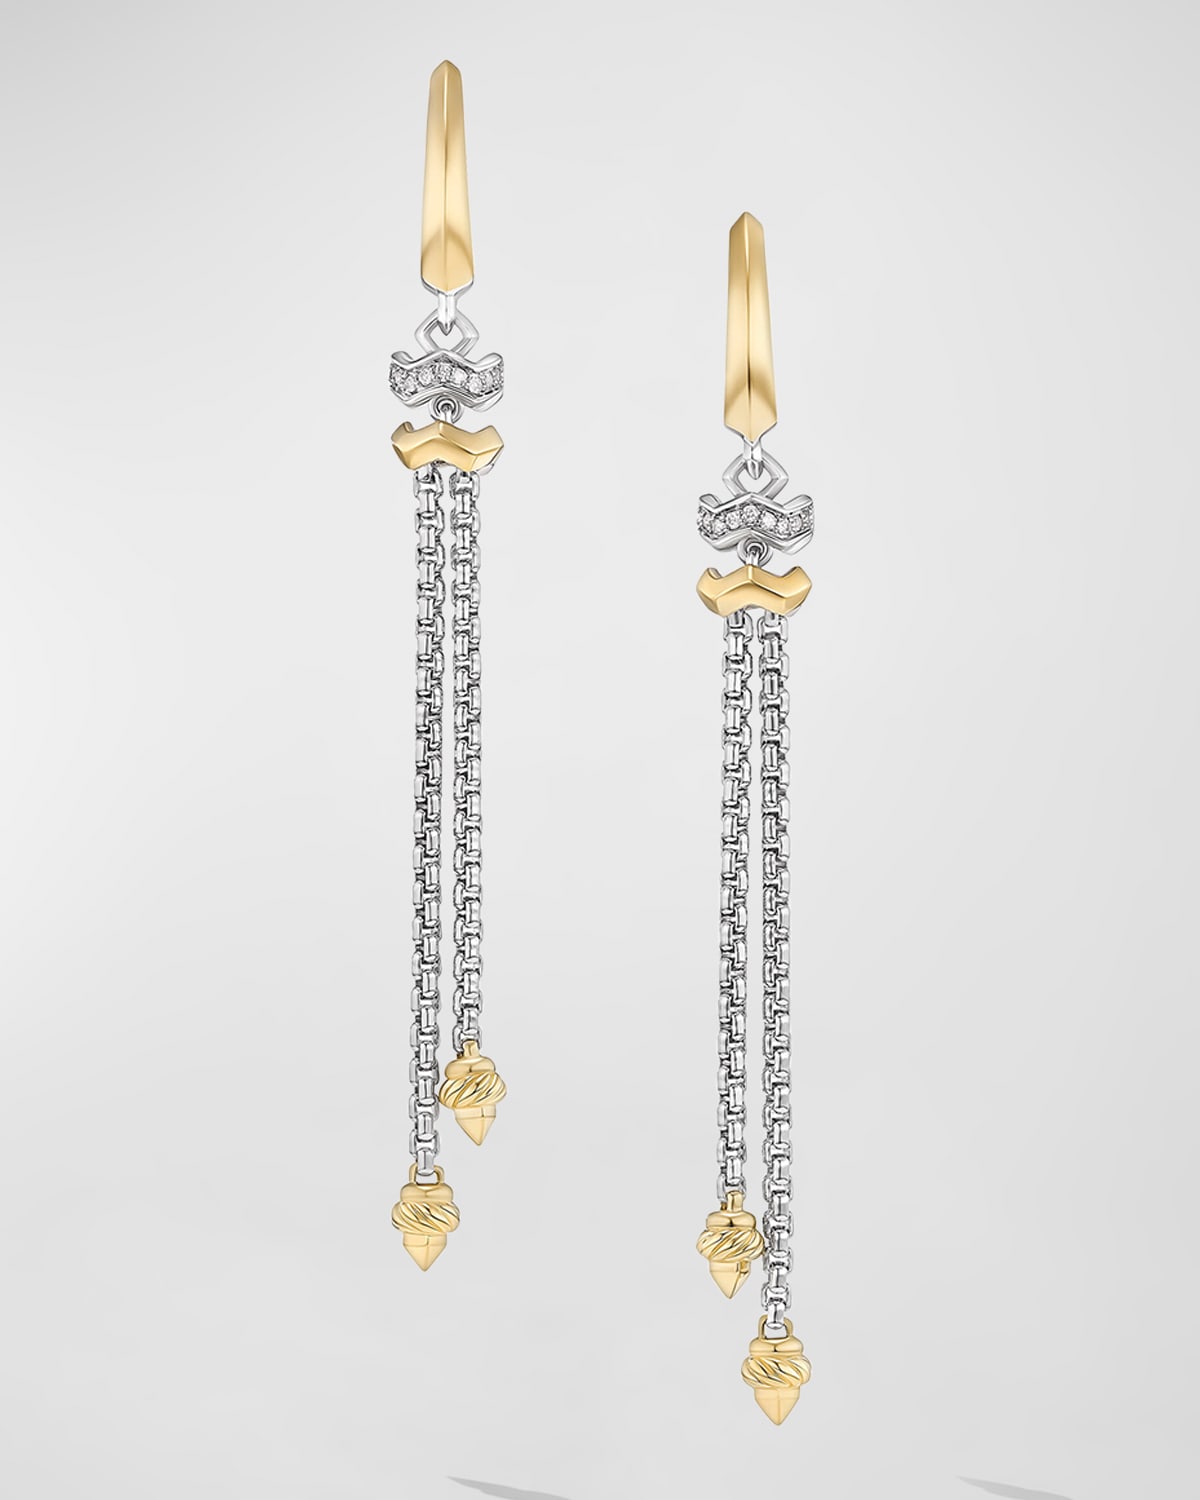 Stax Chain Earrings with Diamonds in 18K Gold and Silver, 64.5mm